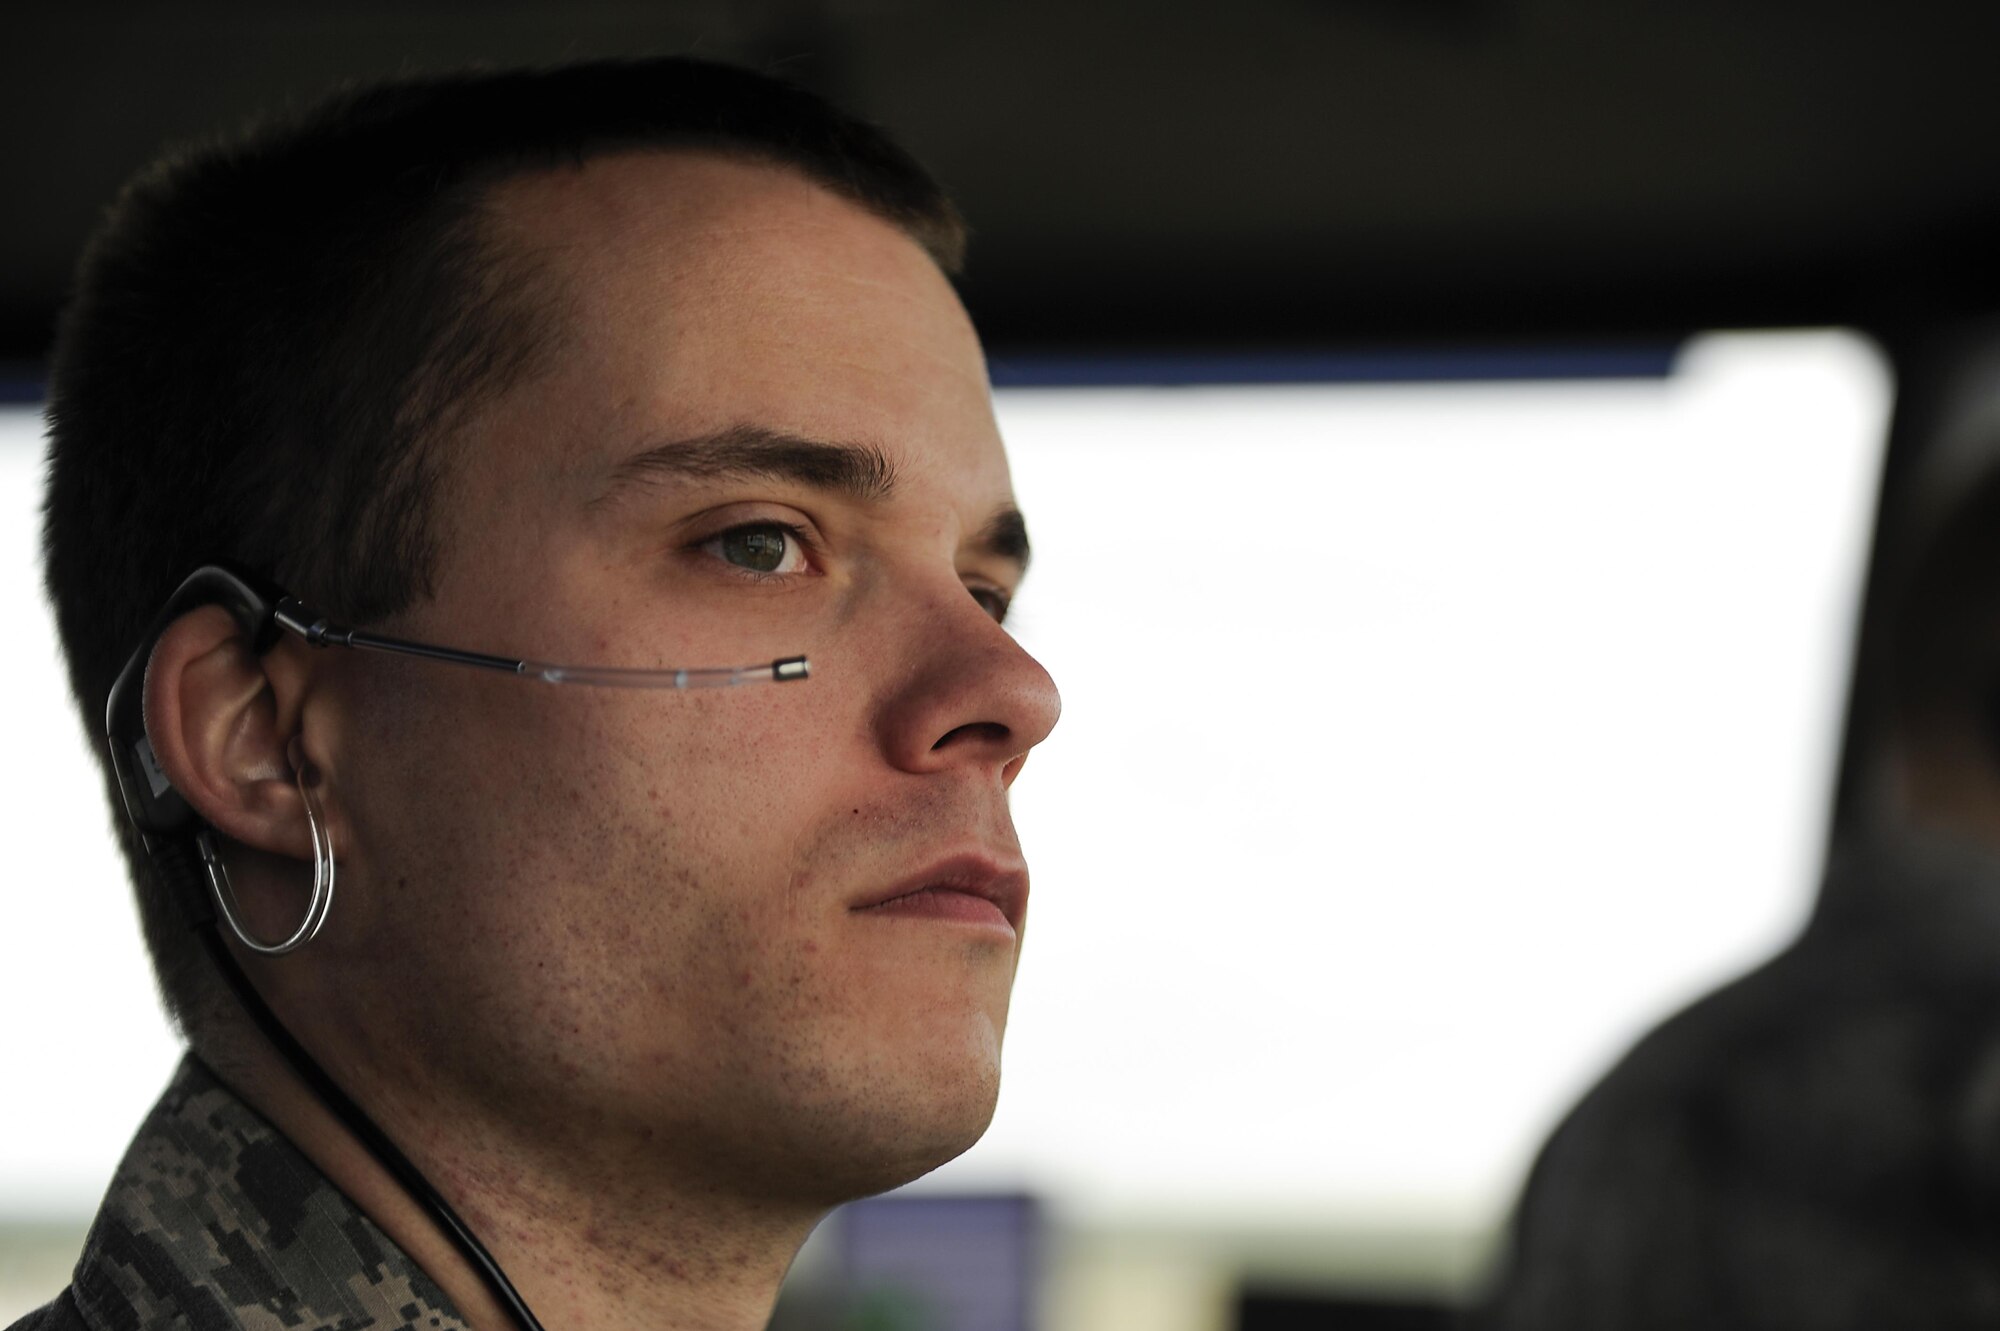 Staff Sgt. Dylan Edney, 47th Operations Support Squadron air traffic control watch supervisor, monitors flightline activity during a morning shift at Laughlin Air Force Base, Texas, Oct. 24, 2017. Laughlin’s air traffic control tower is manned by five positions--the watch supervisor, the supervisor of flying, flight data, ground control and local control. (U.S. Air Force/Airman 1st Class Benjamin N. Valmoja)